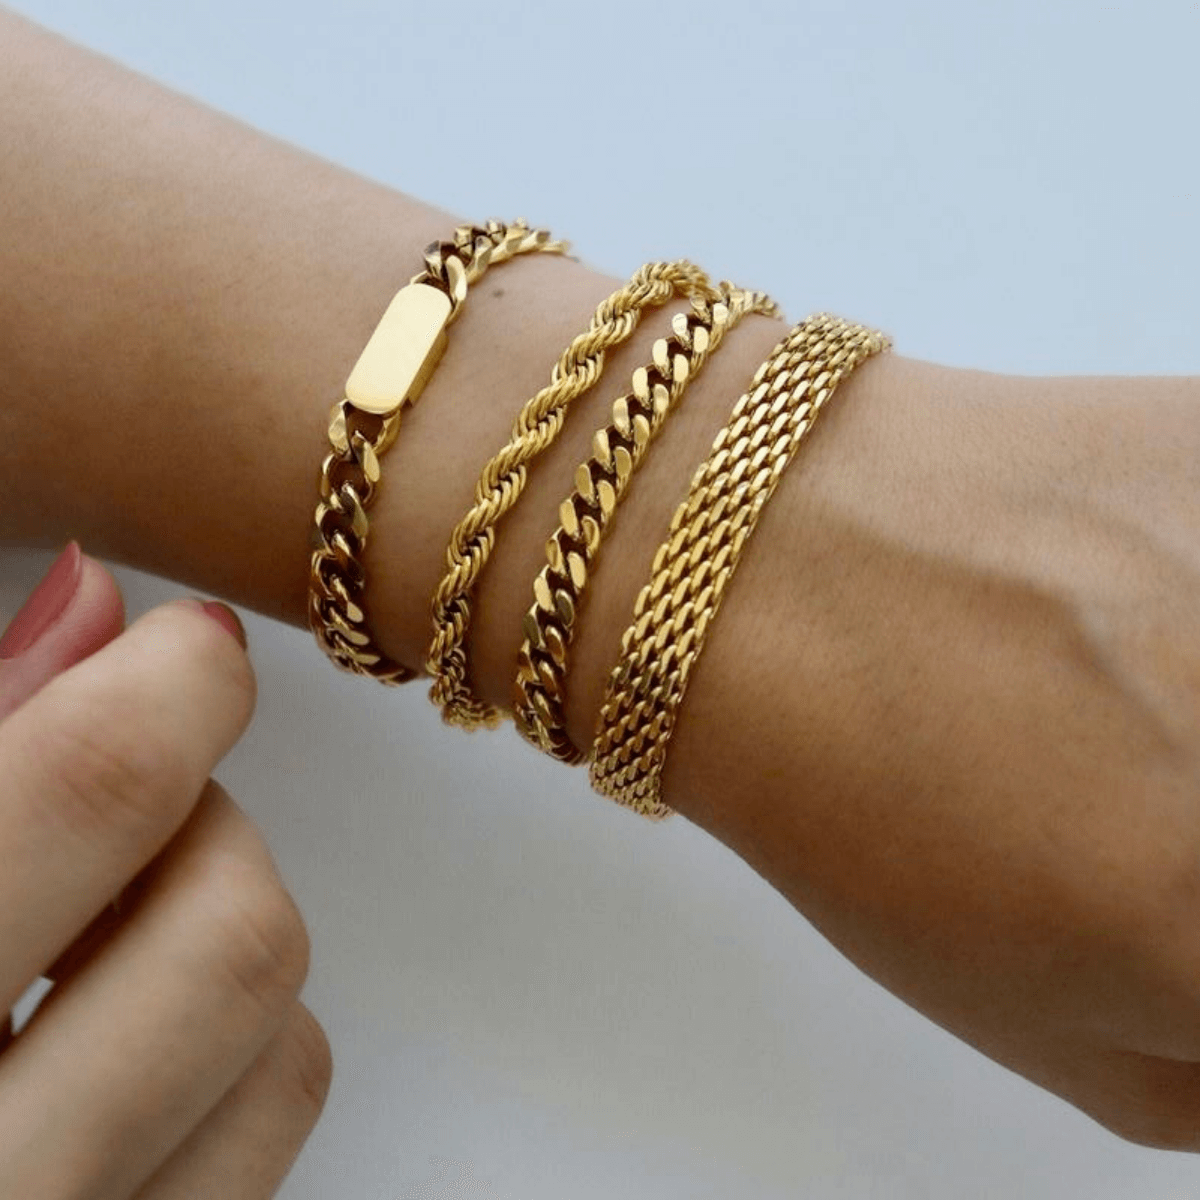 #1 Best Gold Link Chain Bracelet Jewelry Gift for Women | Trending Gold Link Bracelet Chain Jewelry Gift for Women, Girls, Girlfriend, Mother, Wife